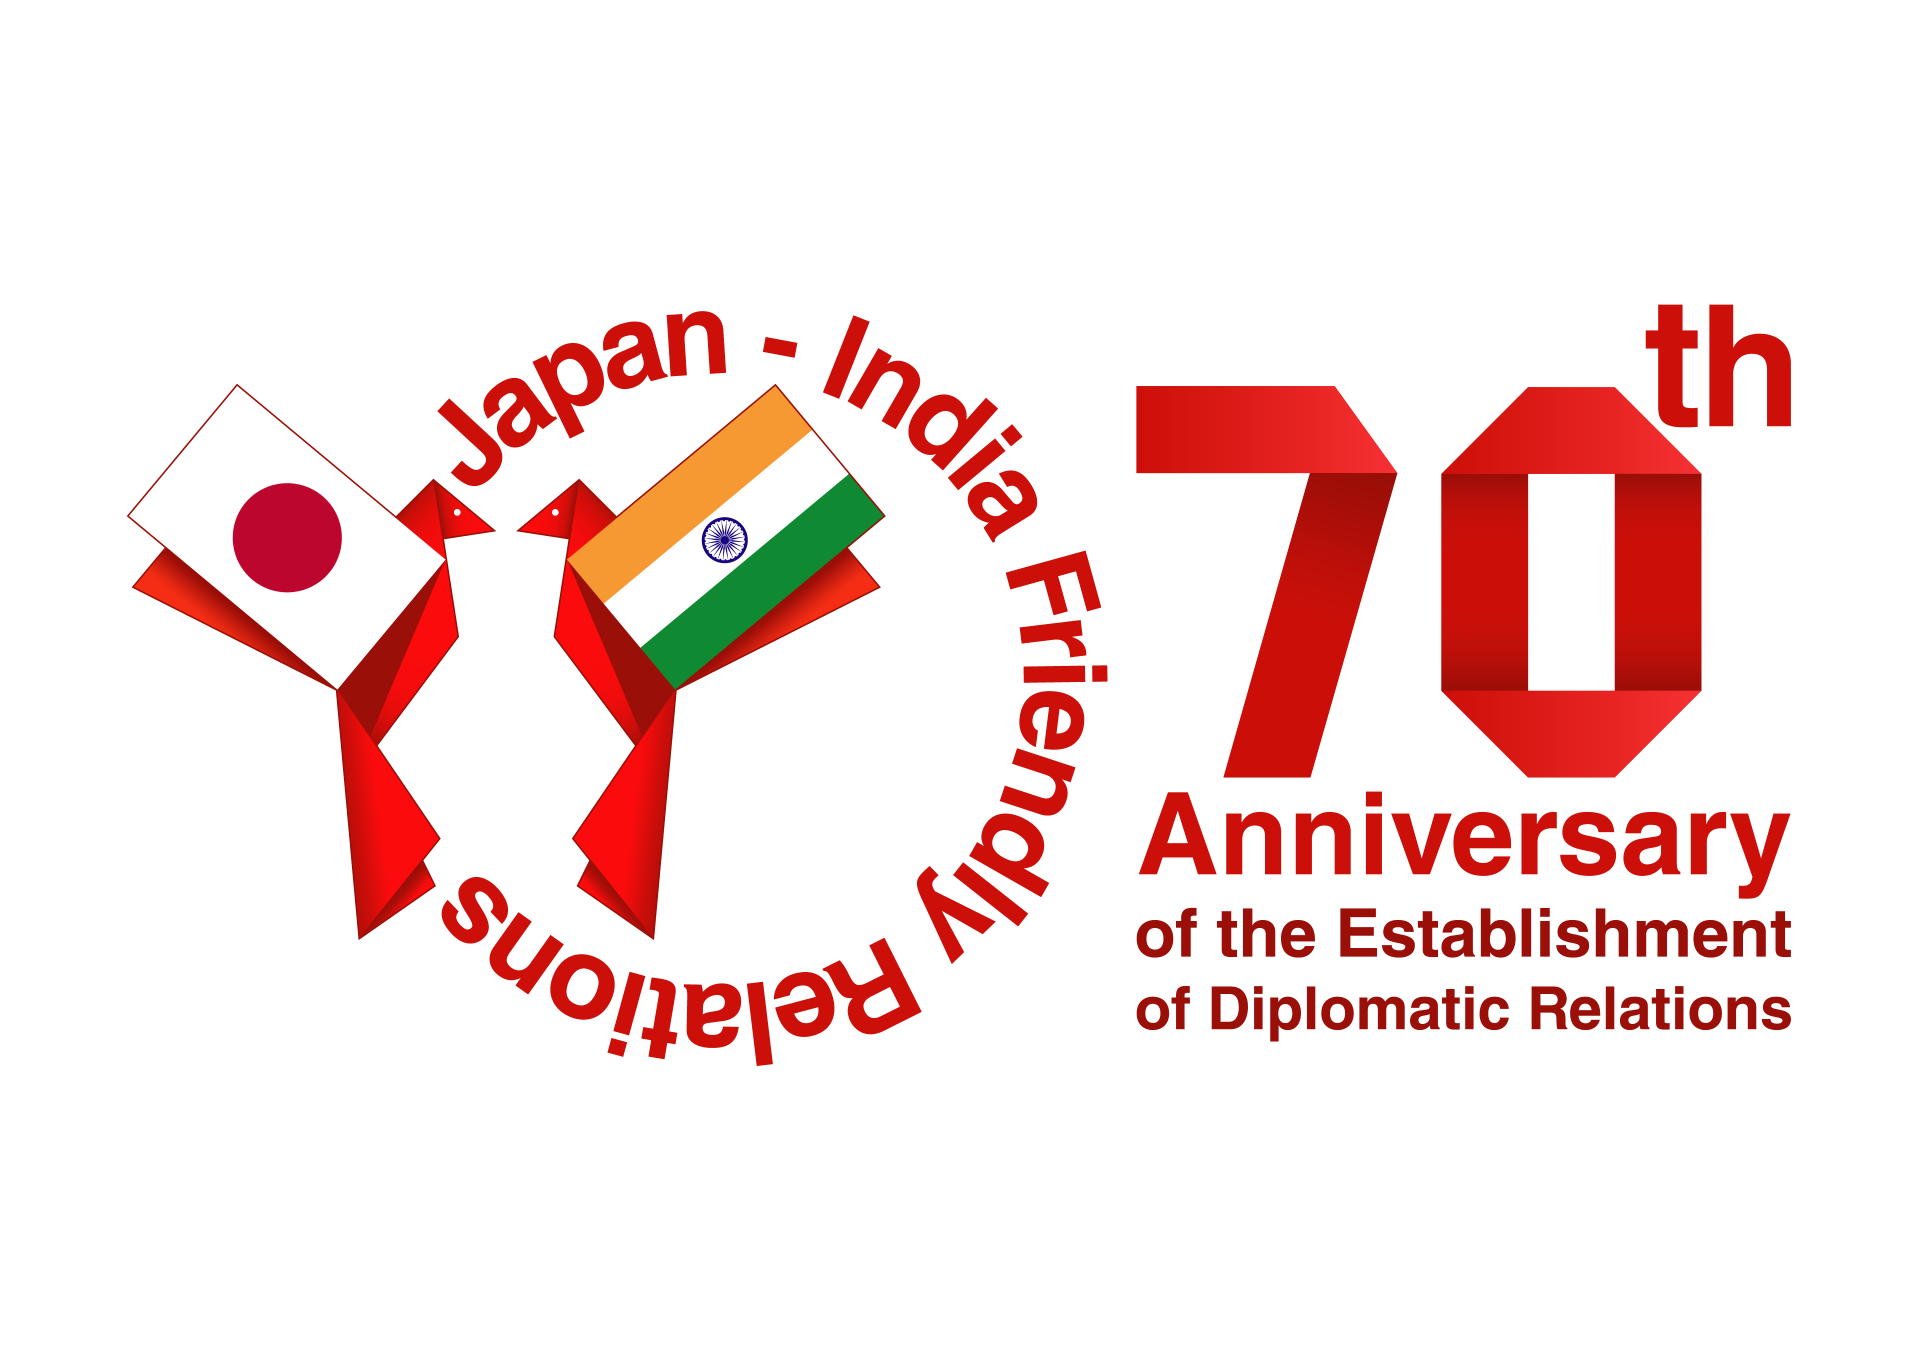 70th Anniversary of the Establishment of the Diplomatic Relations between Japan and India